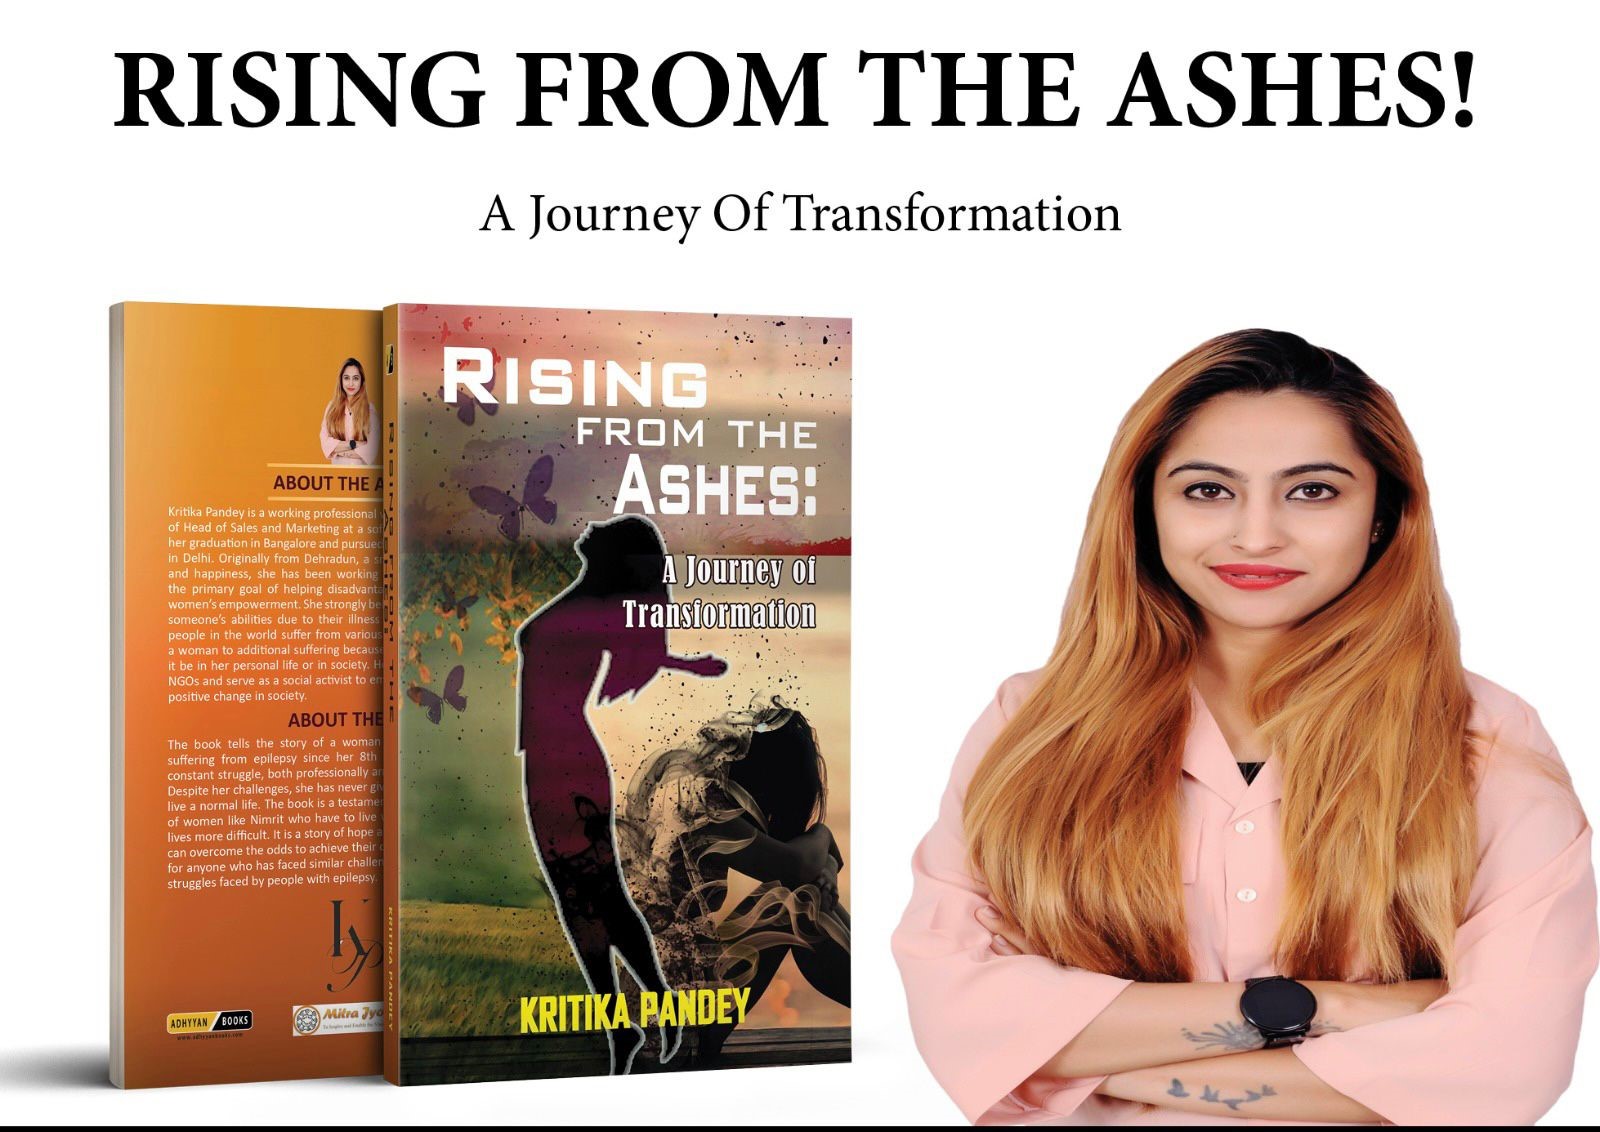 “Rising from the Ashes: Inspiring Story of Women’s Resilience Against Illness and Discrimination”